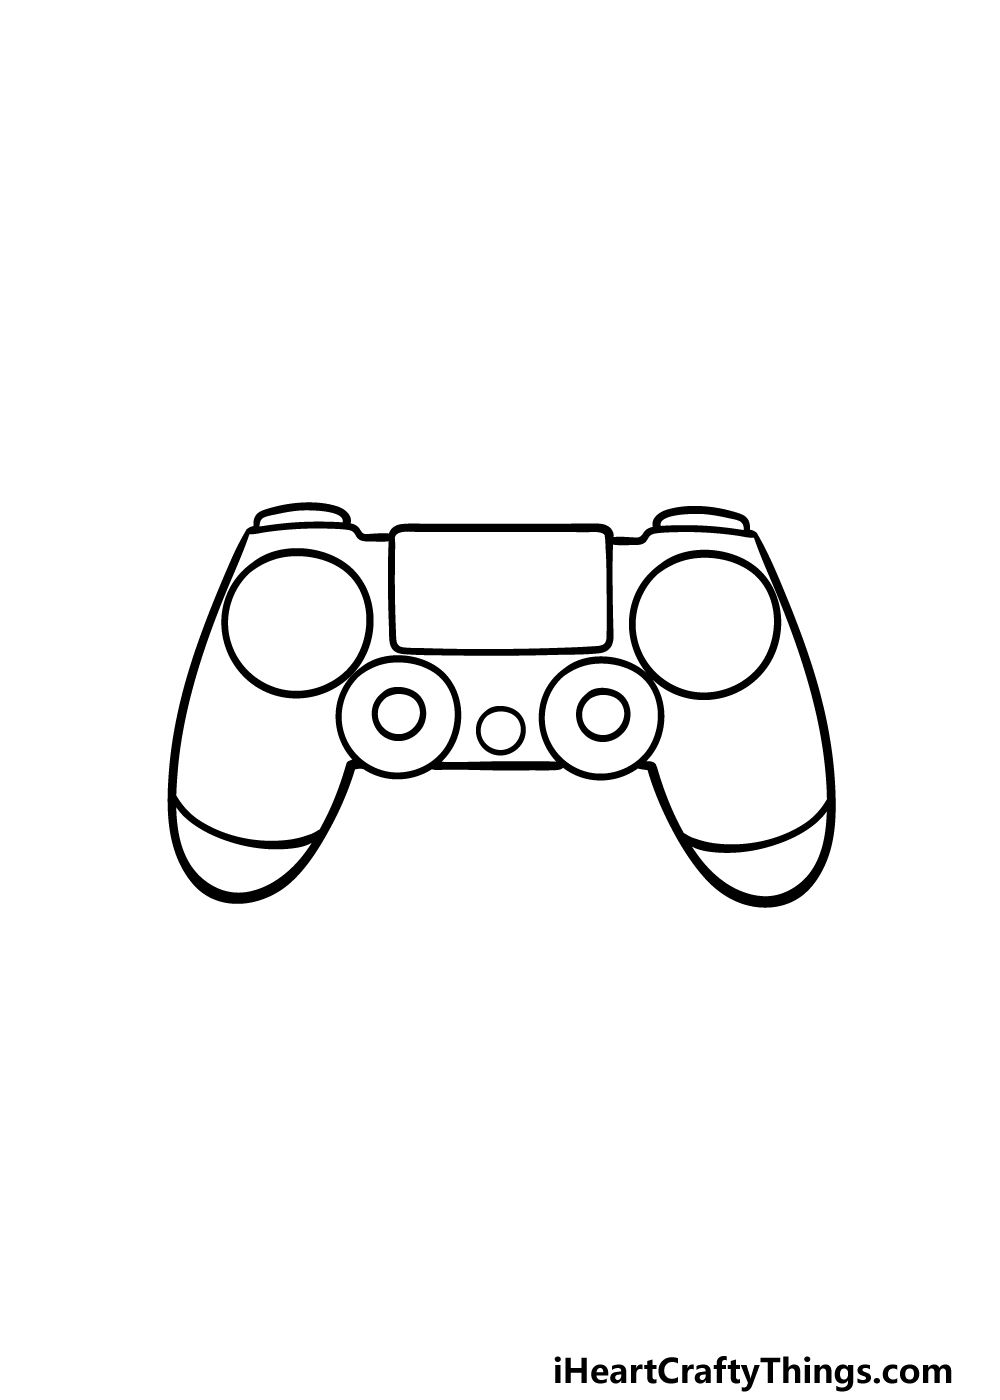 Controller Coloring Pages - Coloring Home